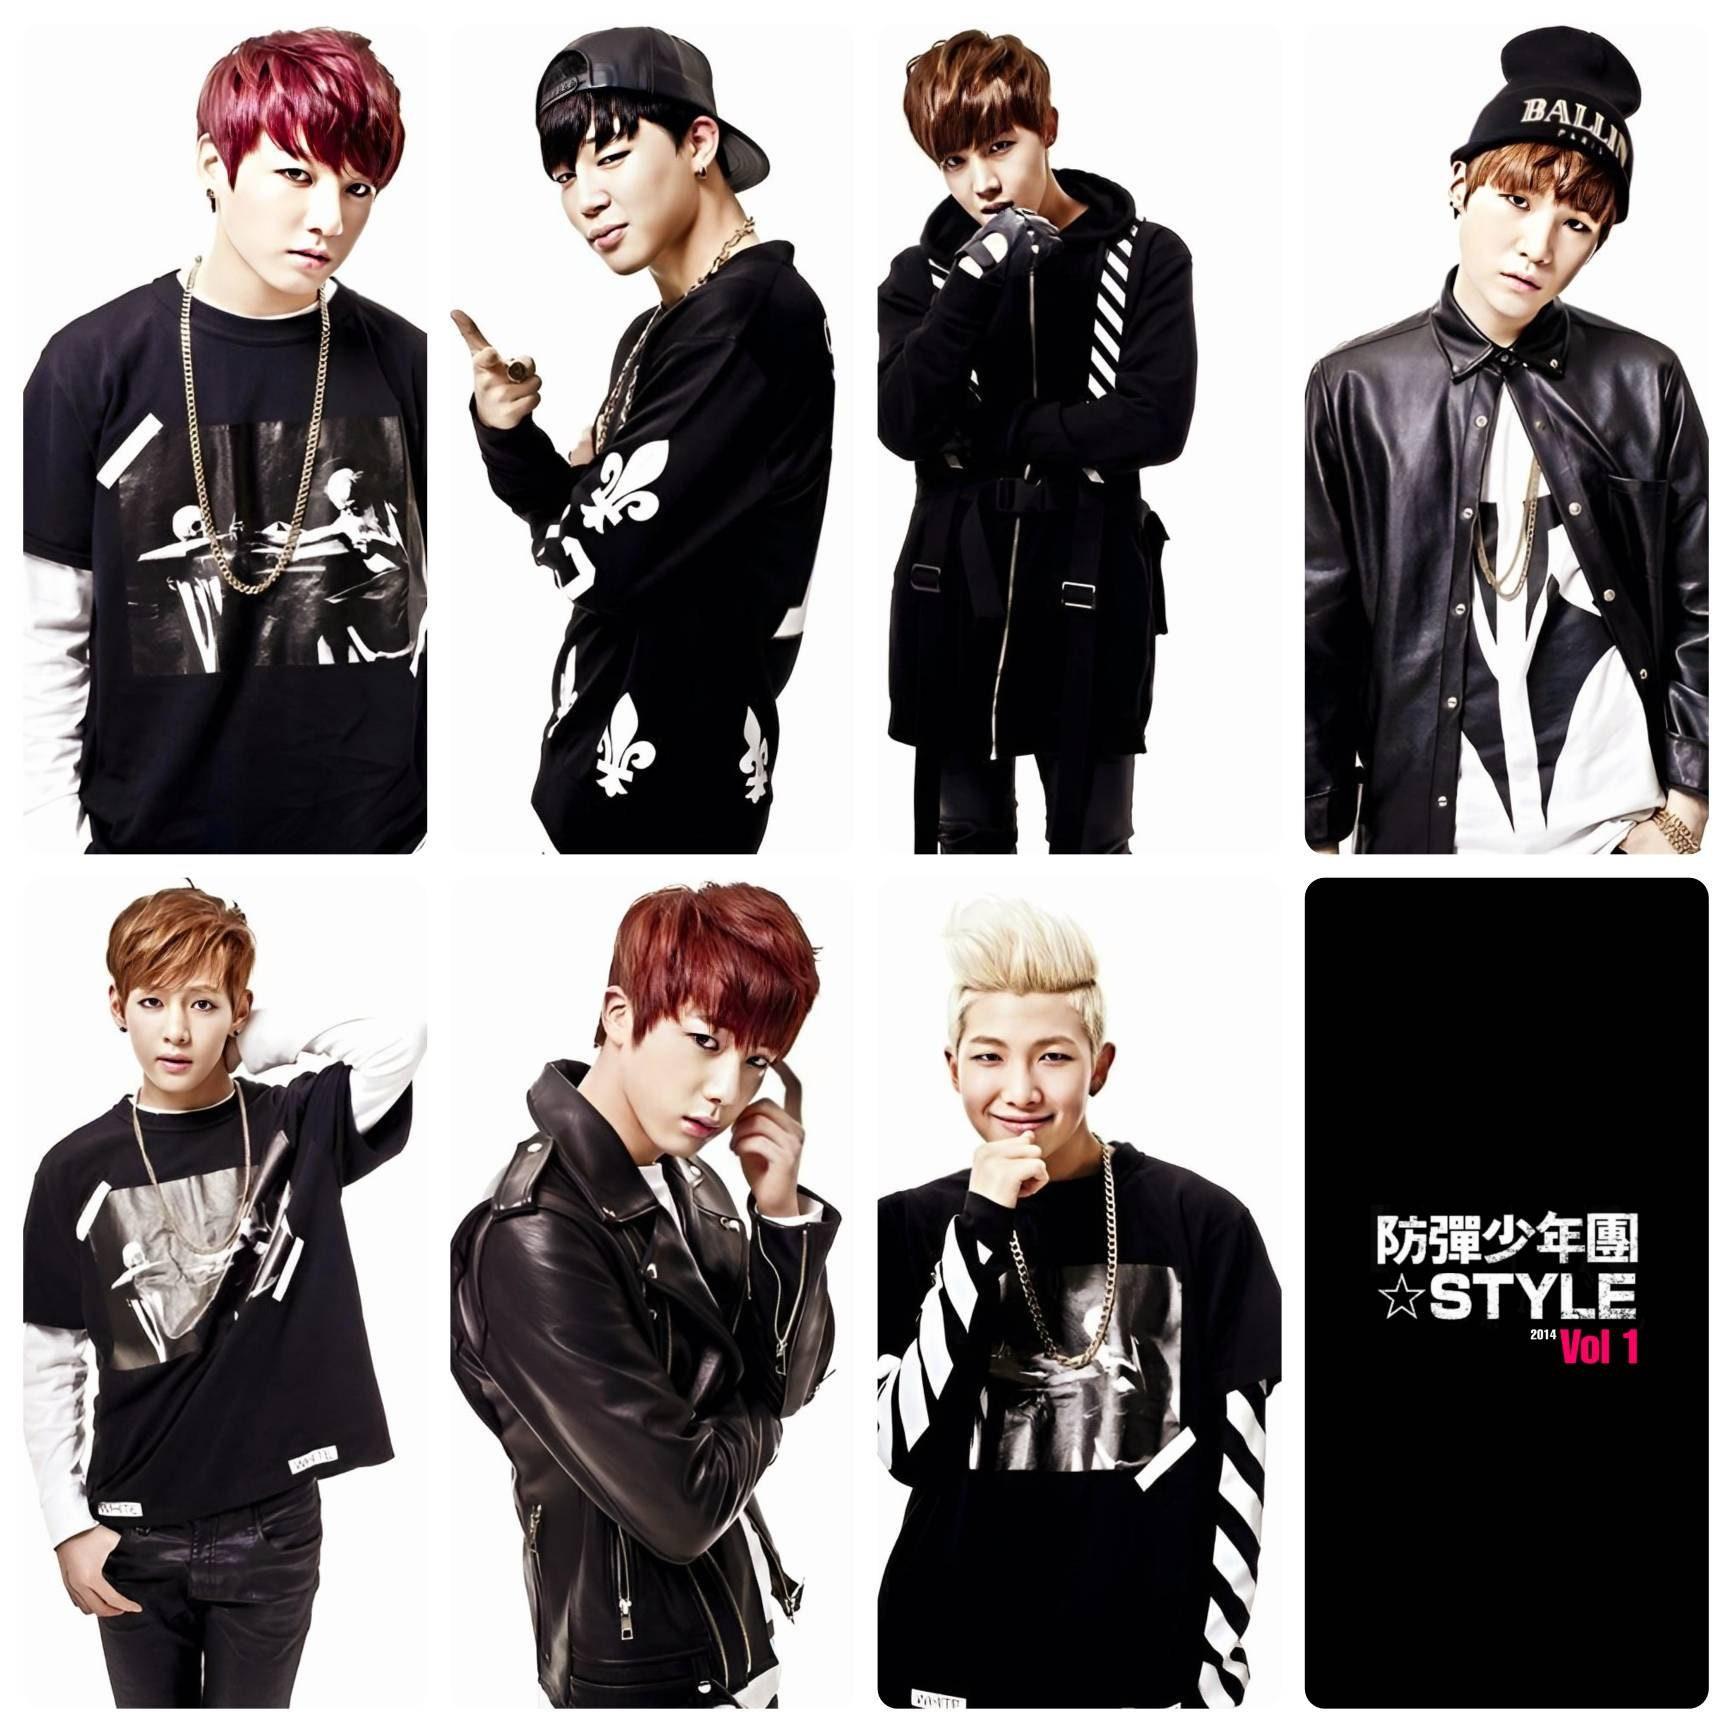 BTS Oricon Style 2014 Photo Cards